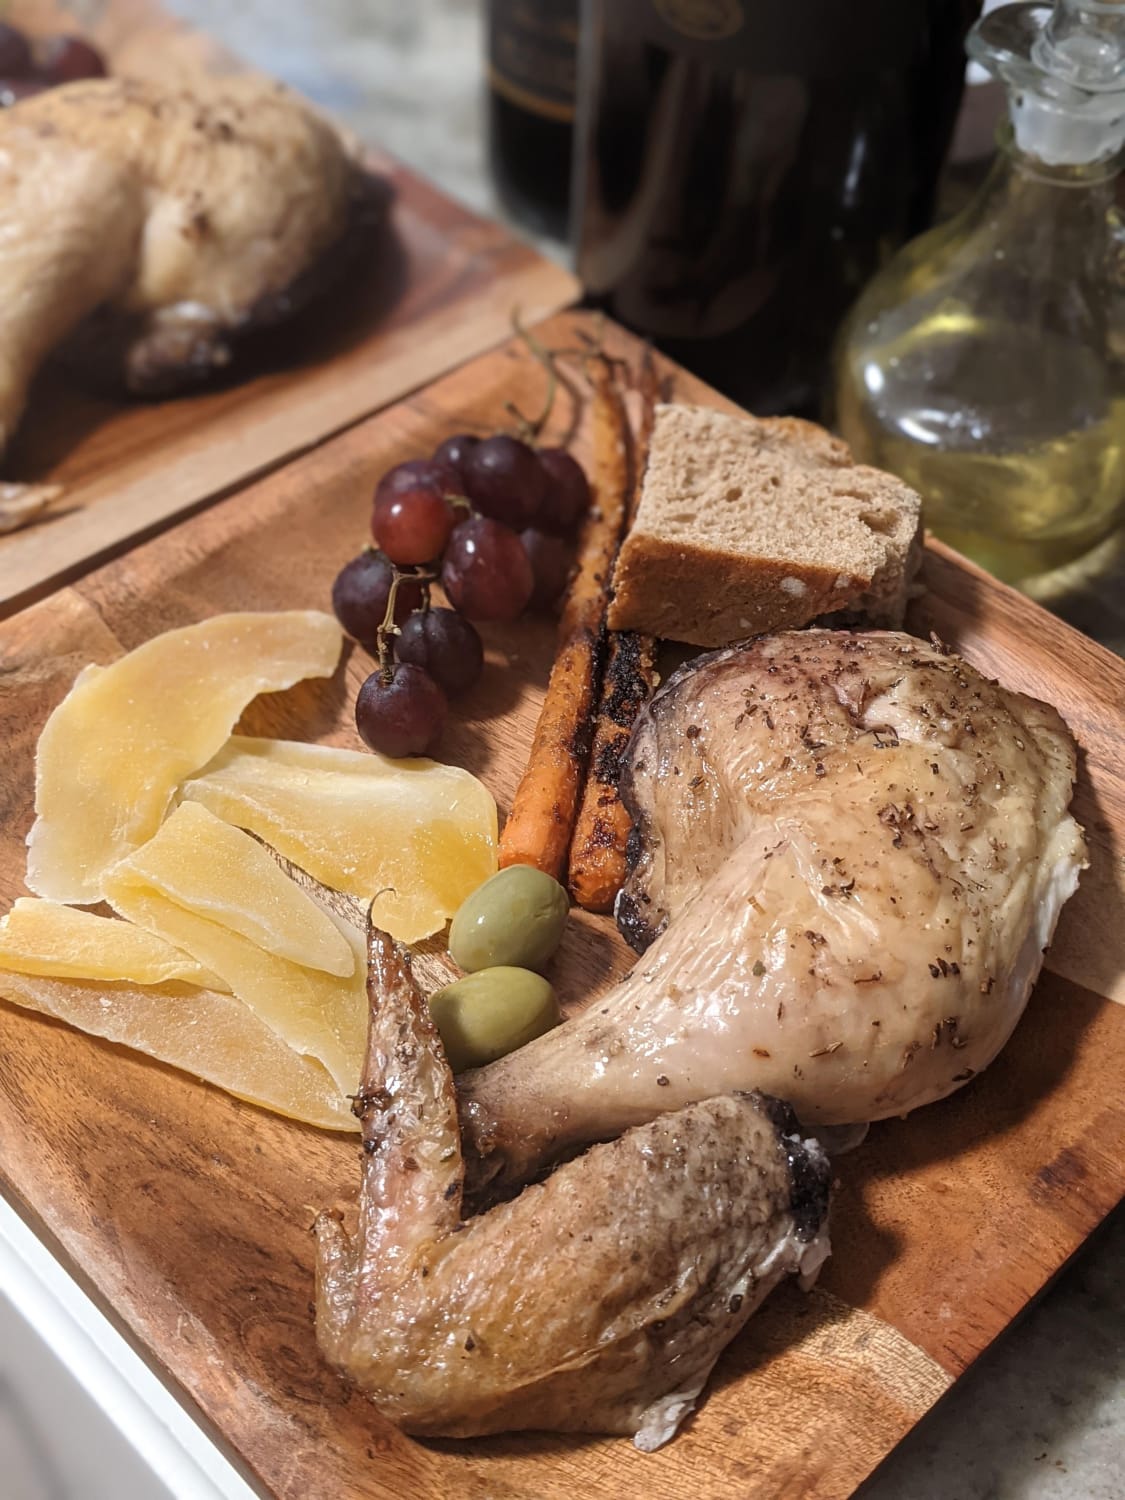 2,000 year old Roman chicken recipe. Parthian Chicken, as featured on Tasting History's youtube channel. Very interesting spice blend, with honey roasted carrots, dried mango, home made bread, olives and fresh grapes!